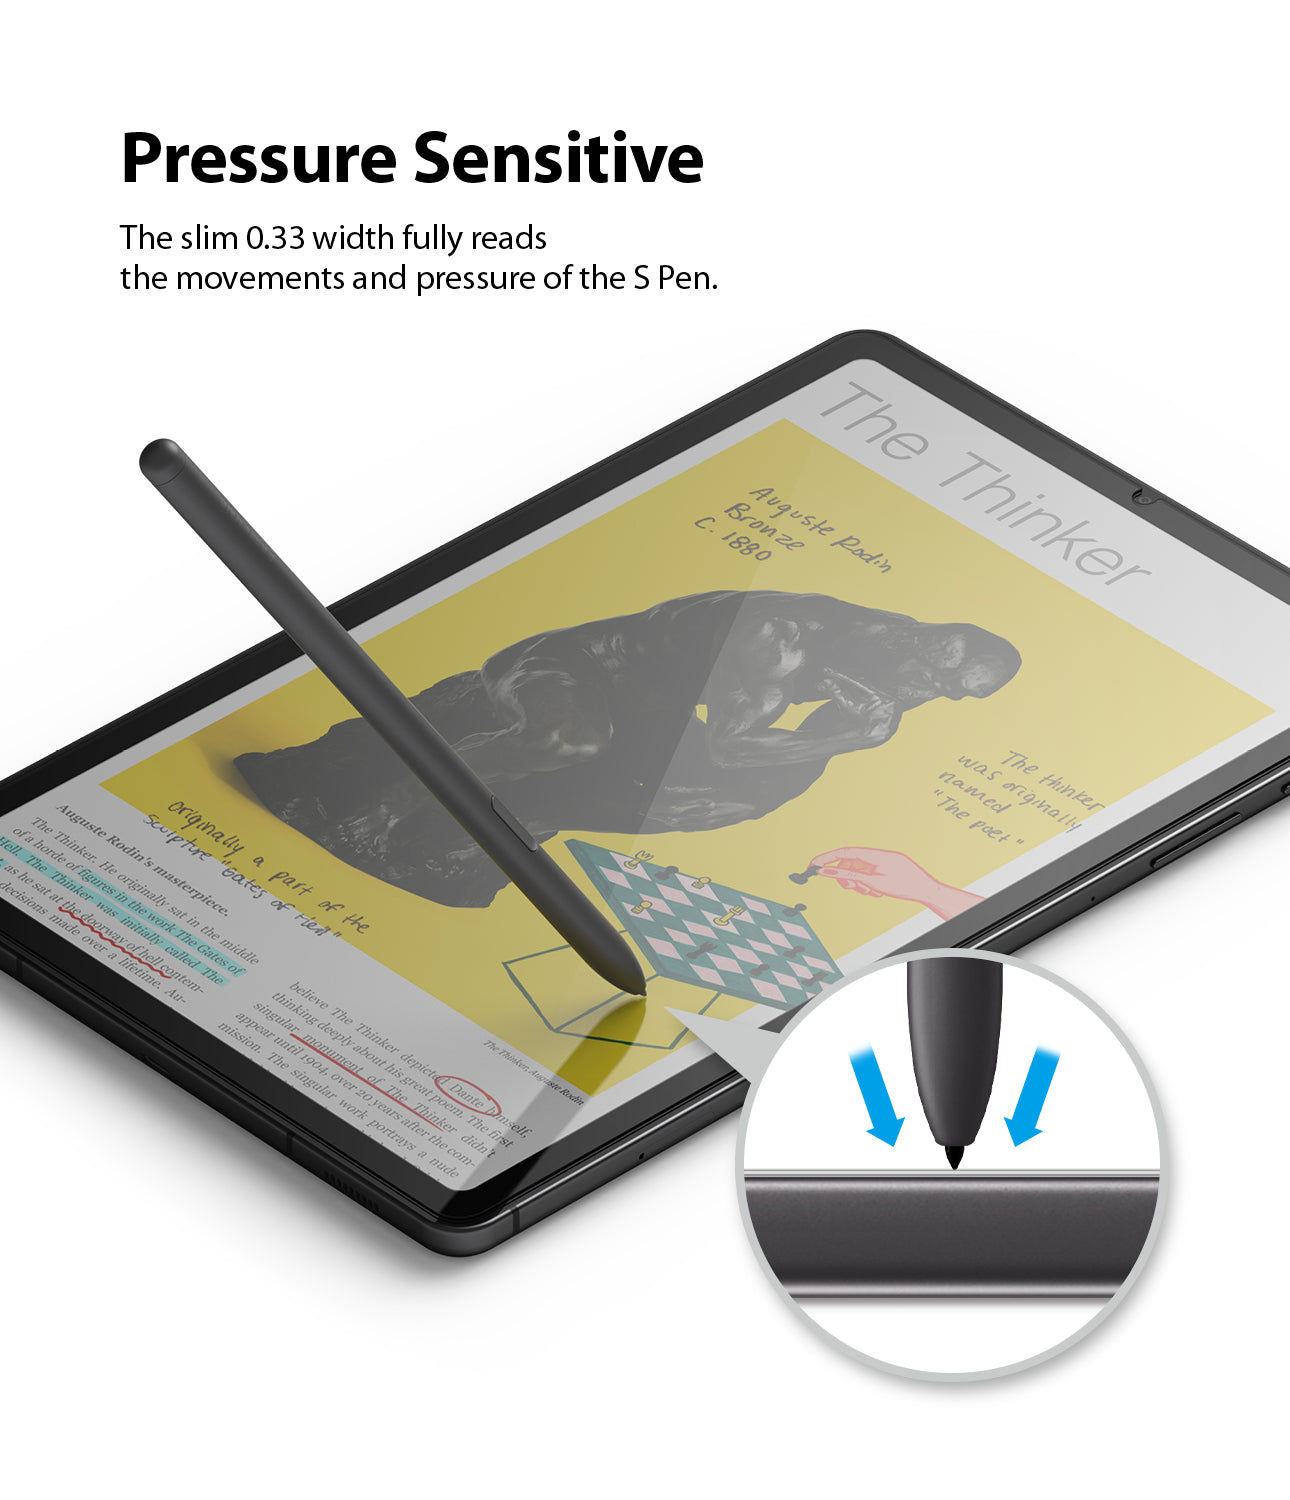 pressure sensitive - the slim 0.33mm width fully reads the movements and pressure of the s pen